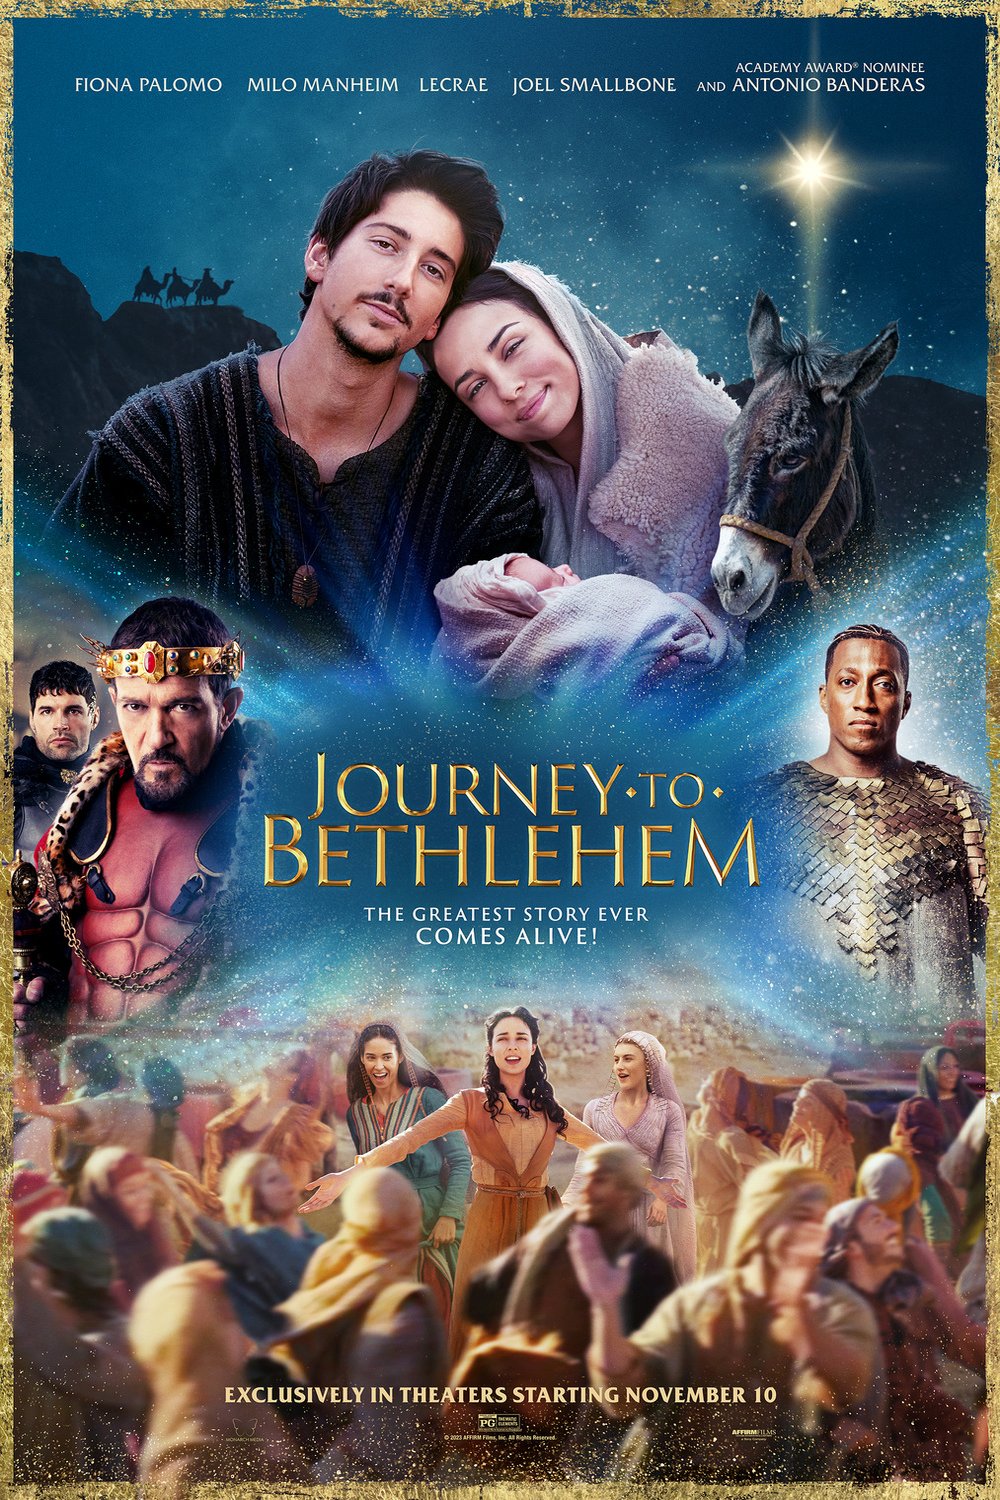 Poster of the movie Journey to Bethlehem